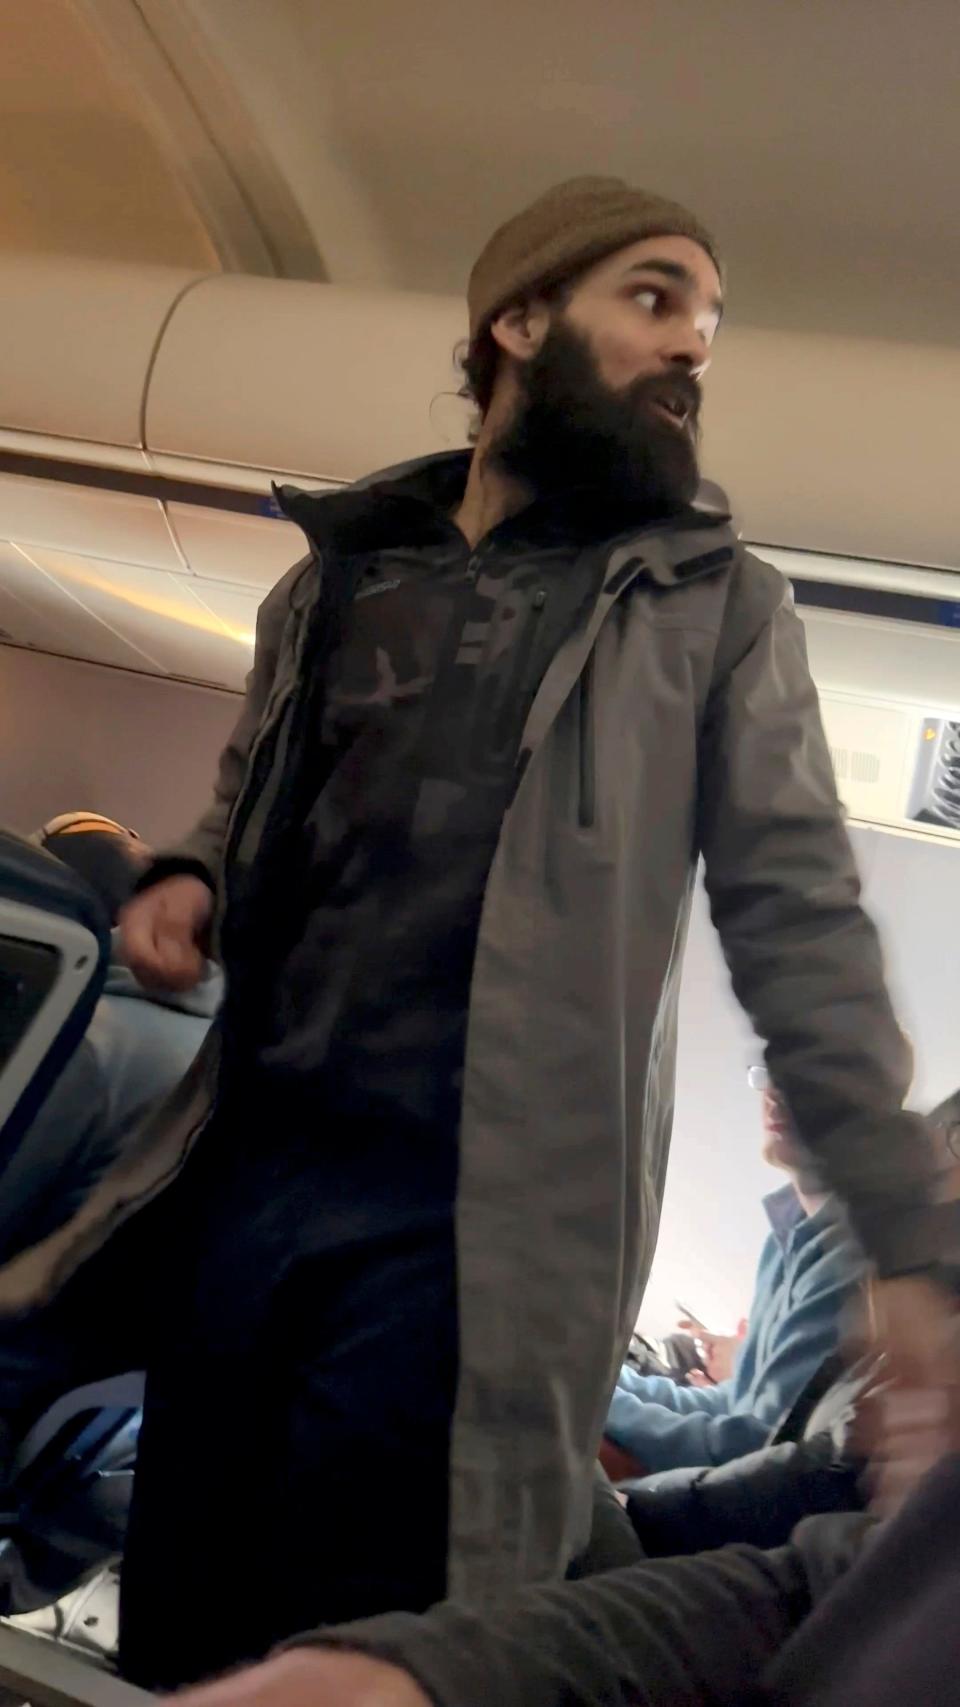 A still image from a video allegedly shows Francisco Severo Torres as he moves through the cabin on a weekend flight from Los Angeles to Boston on March 5.